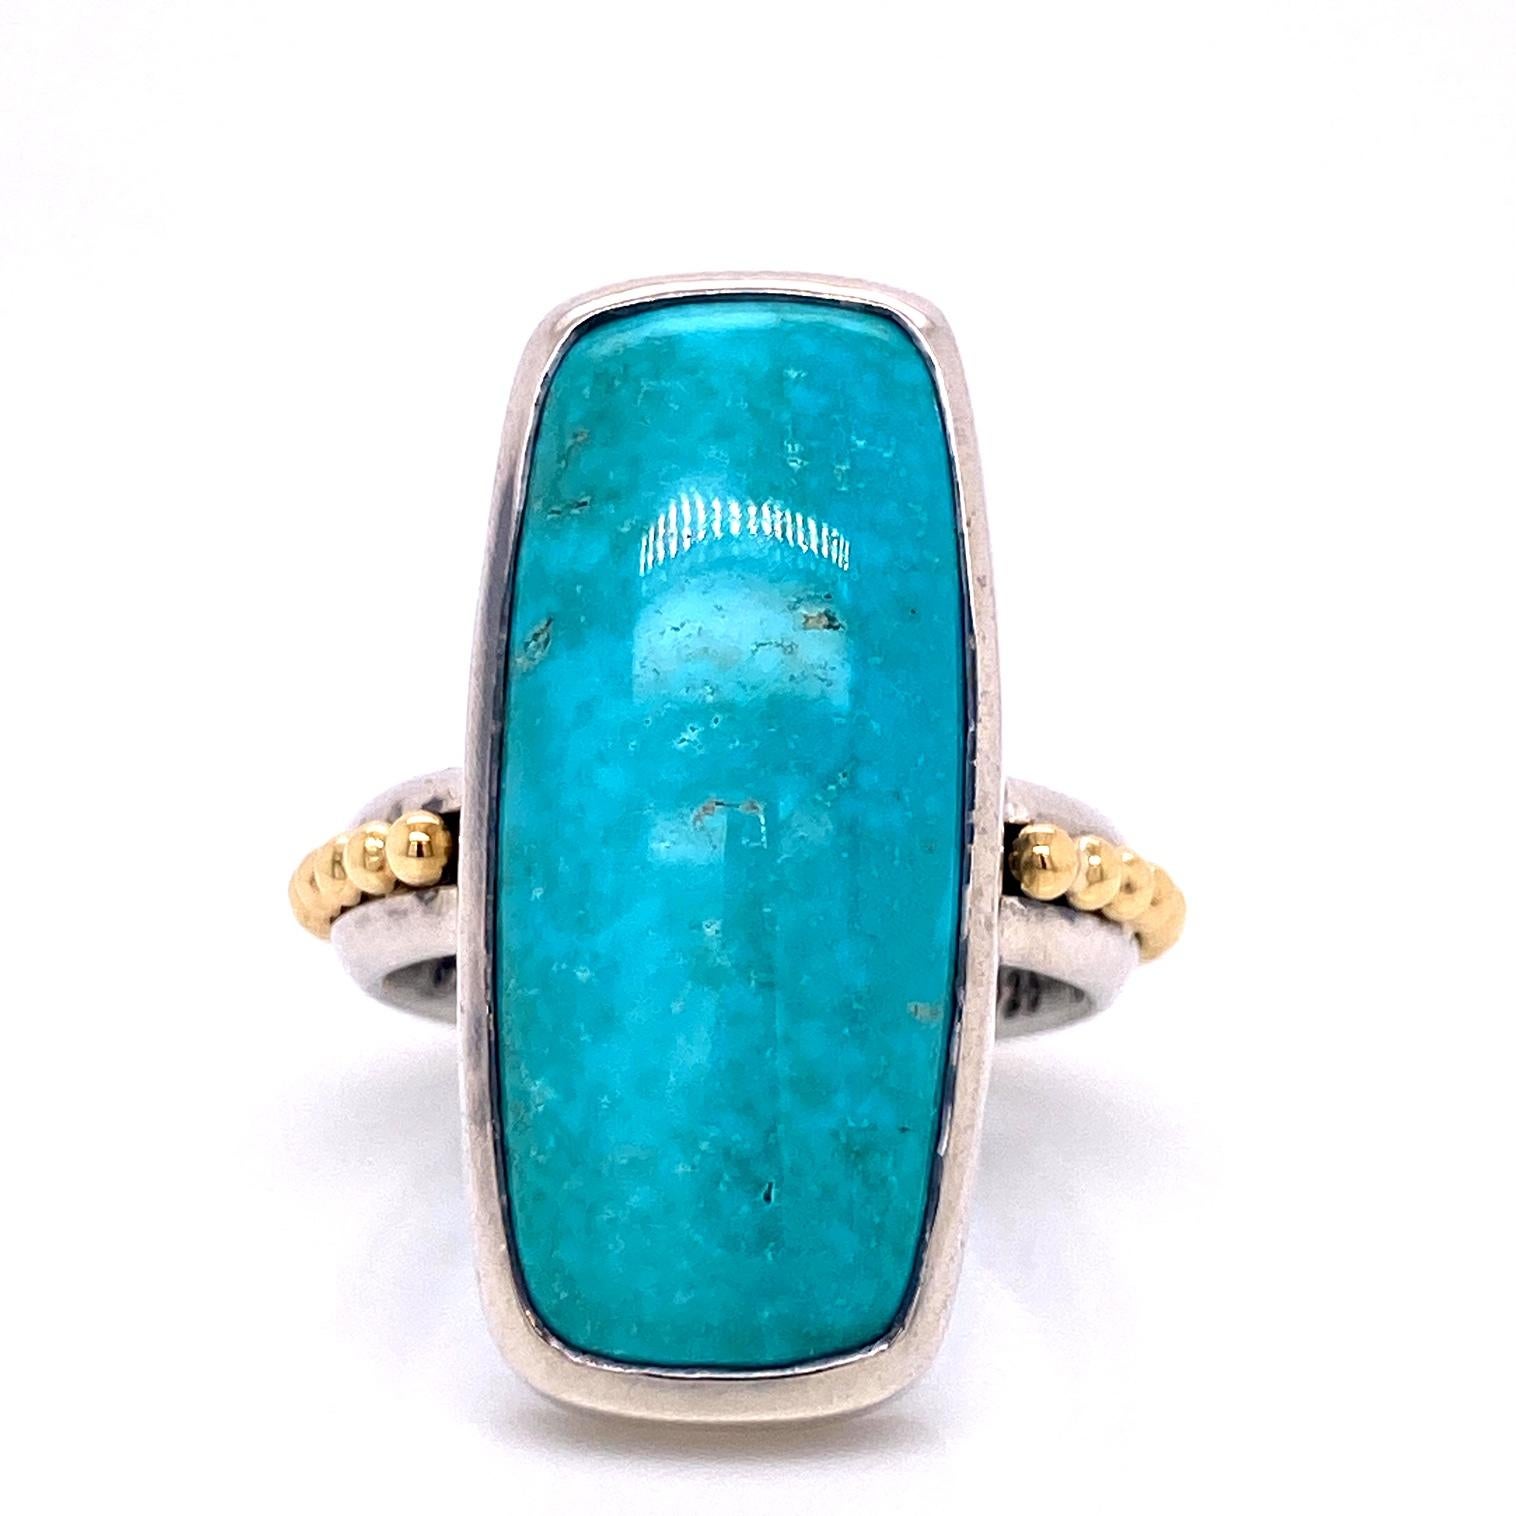 An 18k yellow gold and sterling silver ring bezel set with a 13 carat rectangular Kingman turquoise. Ring size 7. This ring was designed and made by llyn strong.